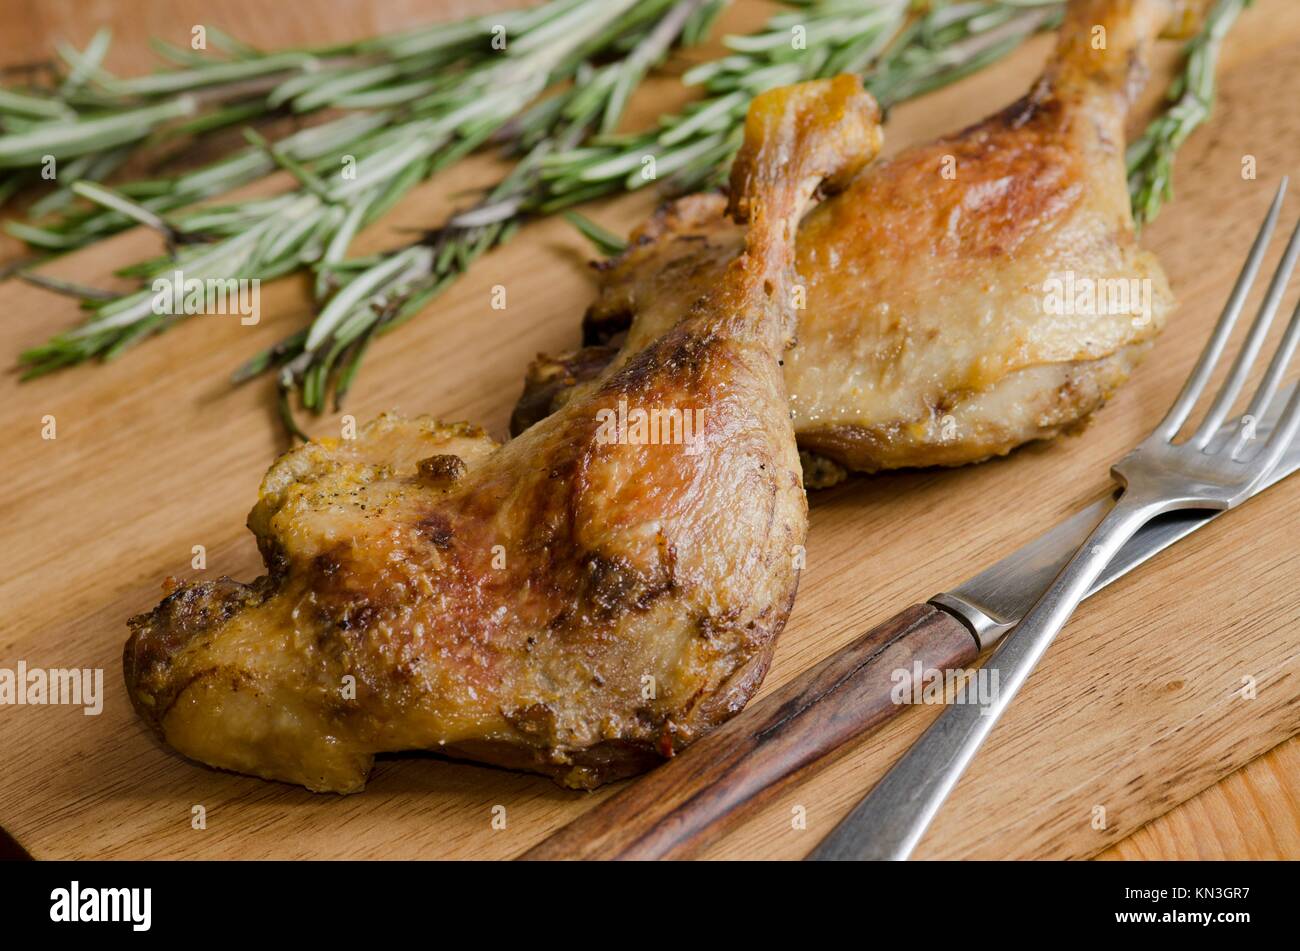 Roast duck legs with rosemary on a wooden board. Stock Photo